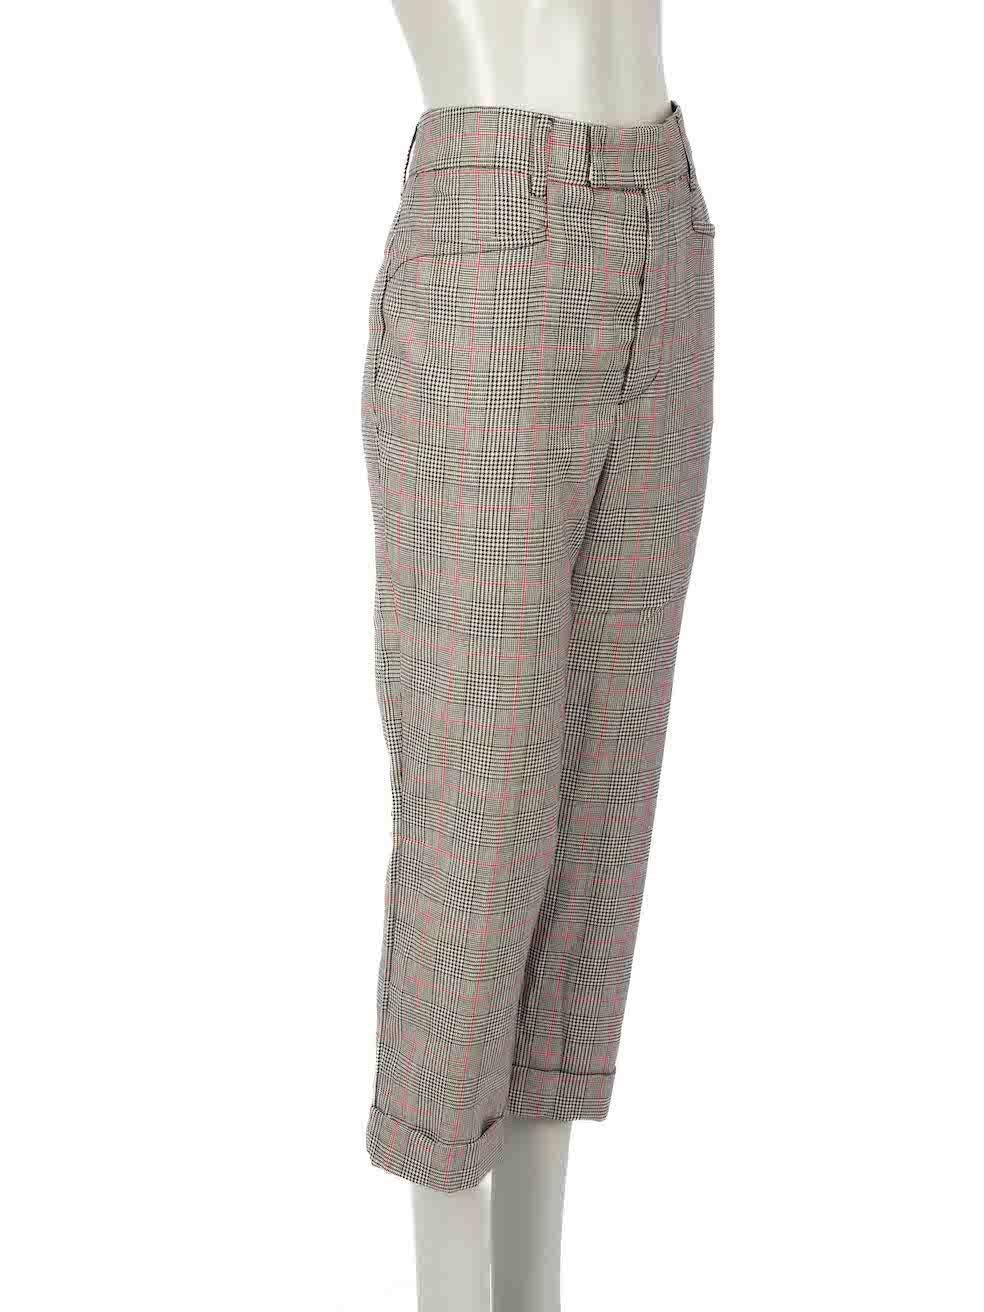 CONDITION is Very good. Hardly any visible wear to trousers is evident on this used Miu Miu designer resale item.
 
Details
Grey
Wool
Trousers
Plaid pattern
Tapered
Cropped
High rise
Fly zip, hook and button fastening
2x Front pockets
1x Back